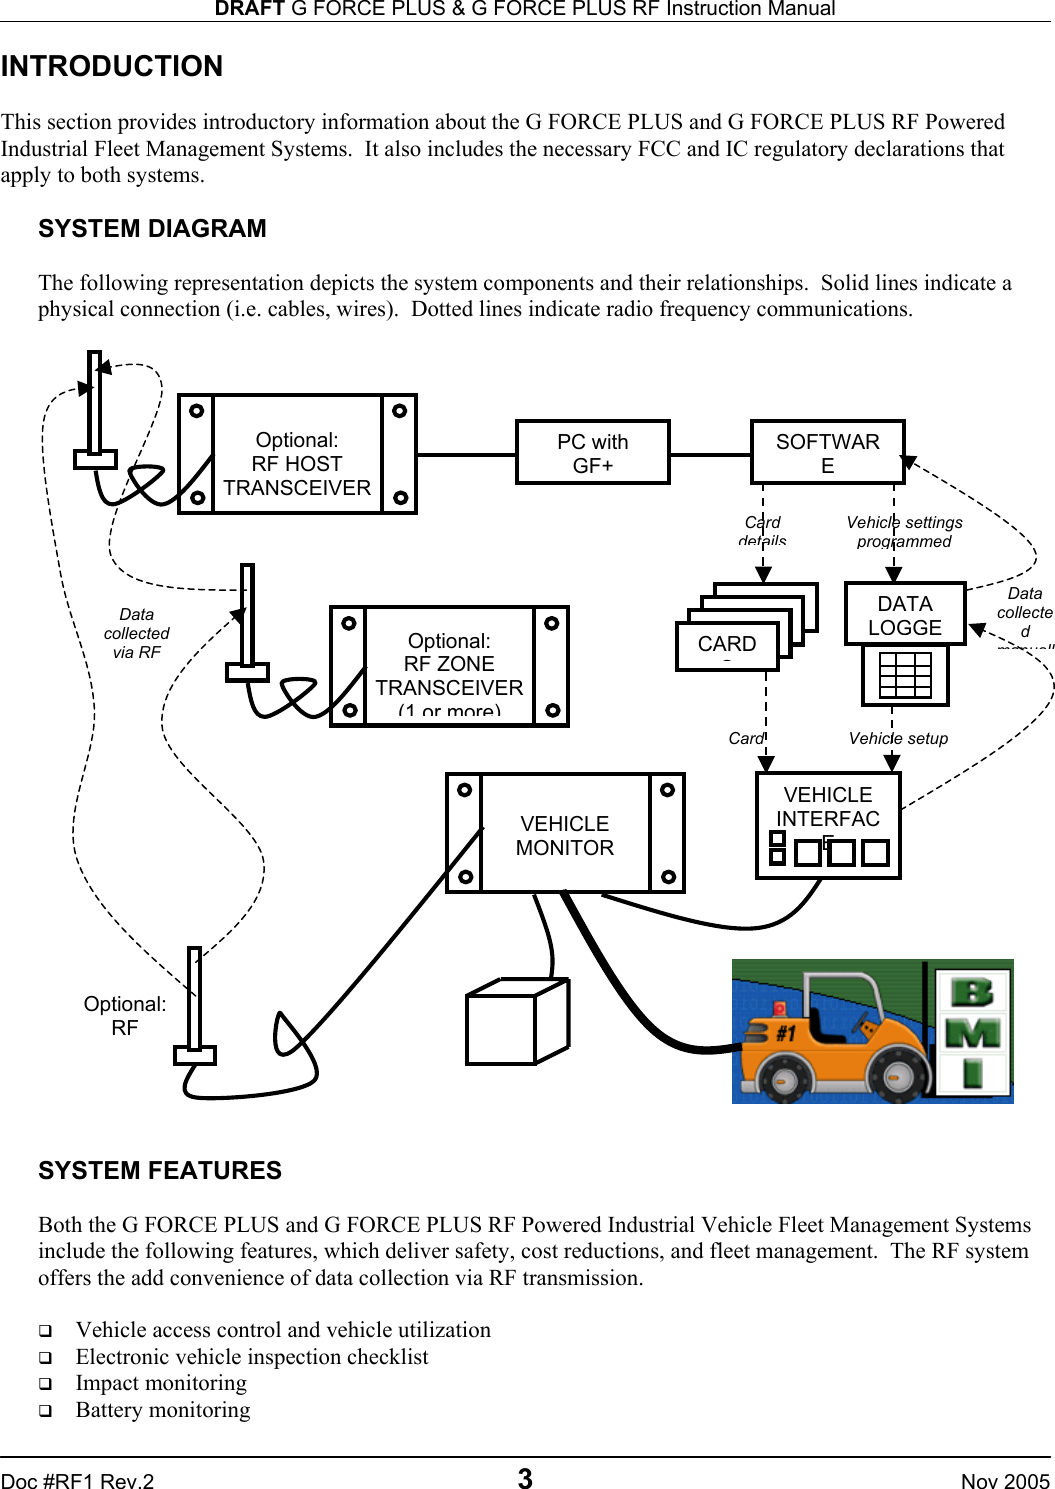 DRAFT G FORCE PLUS &amp; G FORCE PLUS RF Instruction Manual   Doc #RF1 Rev.2  3  Nov 2005 INTRODUCTION  This section provides introductory information about the G FORCE PLUS and G FORCE PLUS RF Powered Industrial Fleet Management Systems.  It also includes the necessary FCC and IC regulatory declarations that apply to both systems.  SYSTEM DIAGRAM  The following representation depicts the system components and their relationships.  Solid lines indicate a physical connection (i.e. cables, wires).  Dotted lines indicate radio frequency communications.    SYSTEM FEATURES  Both the G FORCE PLUS and G FORCE PLUS RF Powered Industrial Vehicle Fleet Management Systems include the following features, which deliver safety, cost reductions, and fleet management.  The RF system offers the add convenience of data collection via RF transmission.    Vehicle access control and vehicle utilization   Electronic vehicle inspection checklist   Impact monitoring   Battery monitoring PC with GF+SOFTWARE Optional:  RF HOST TRANSCEIVER Card Vehicle setupVehicle settings programmedDATA LOGGE CARDSCard detailsVEHICLE INTERFACE  VEHICLE MONITOR   Optional:  RF ZONE TRANSCEIVER (1 or more)Optional: RF Data collected via RFData collected manuall